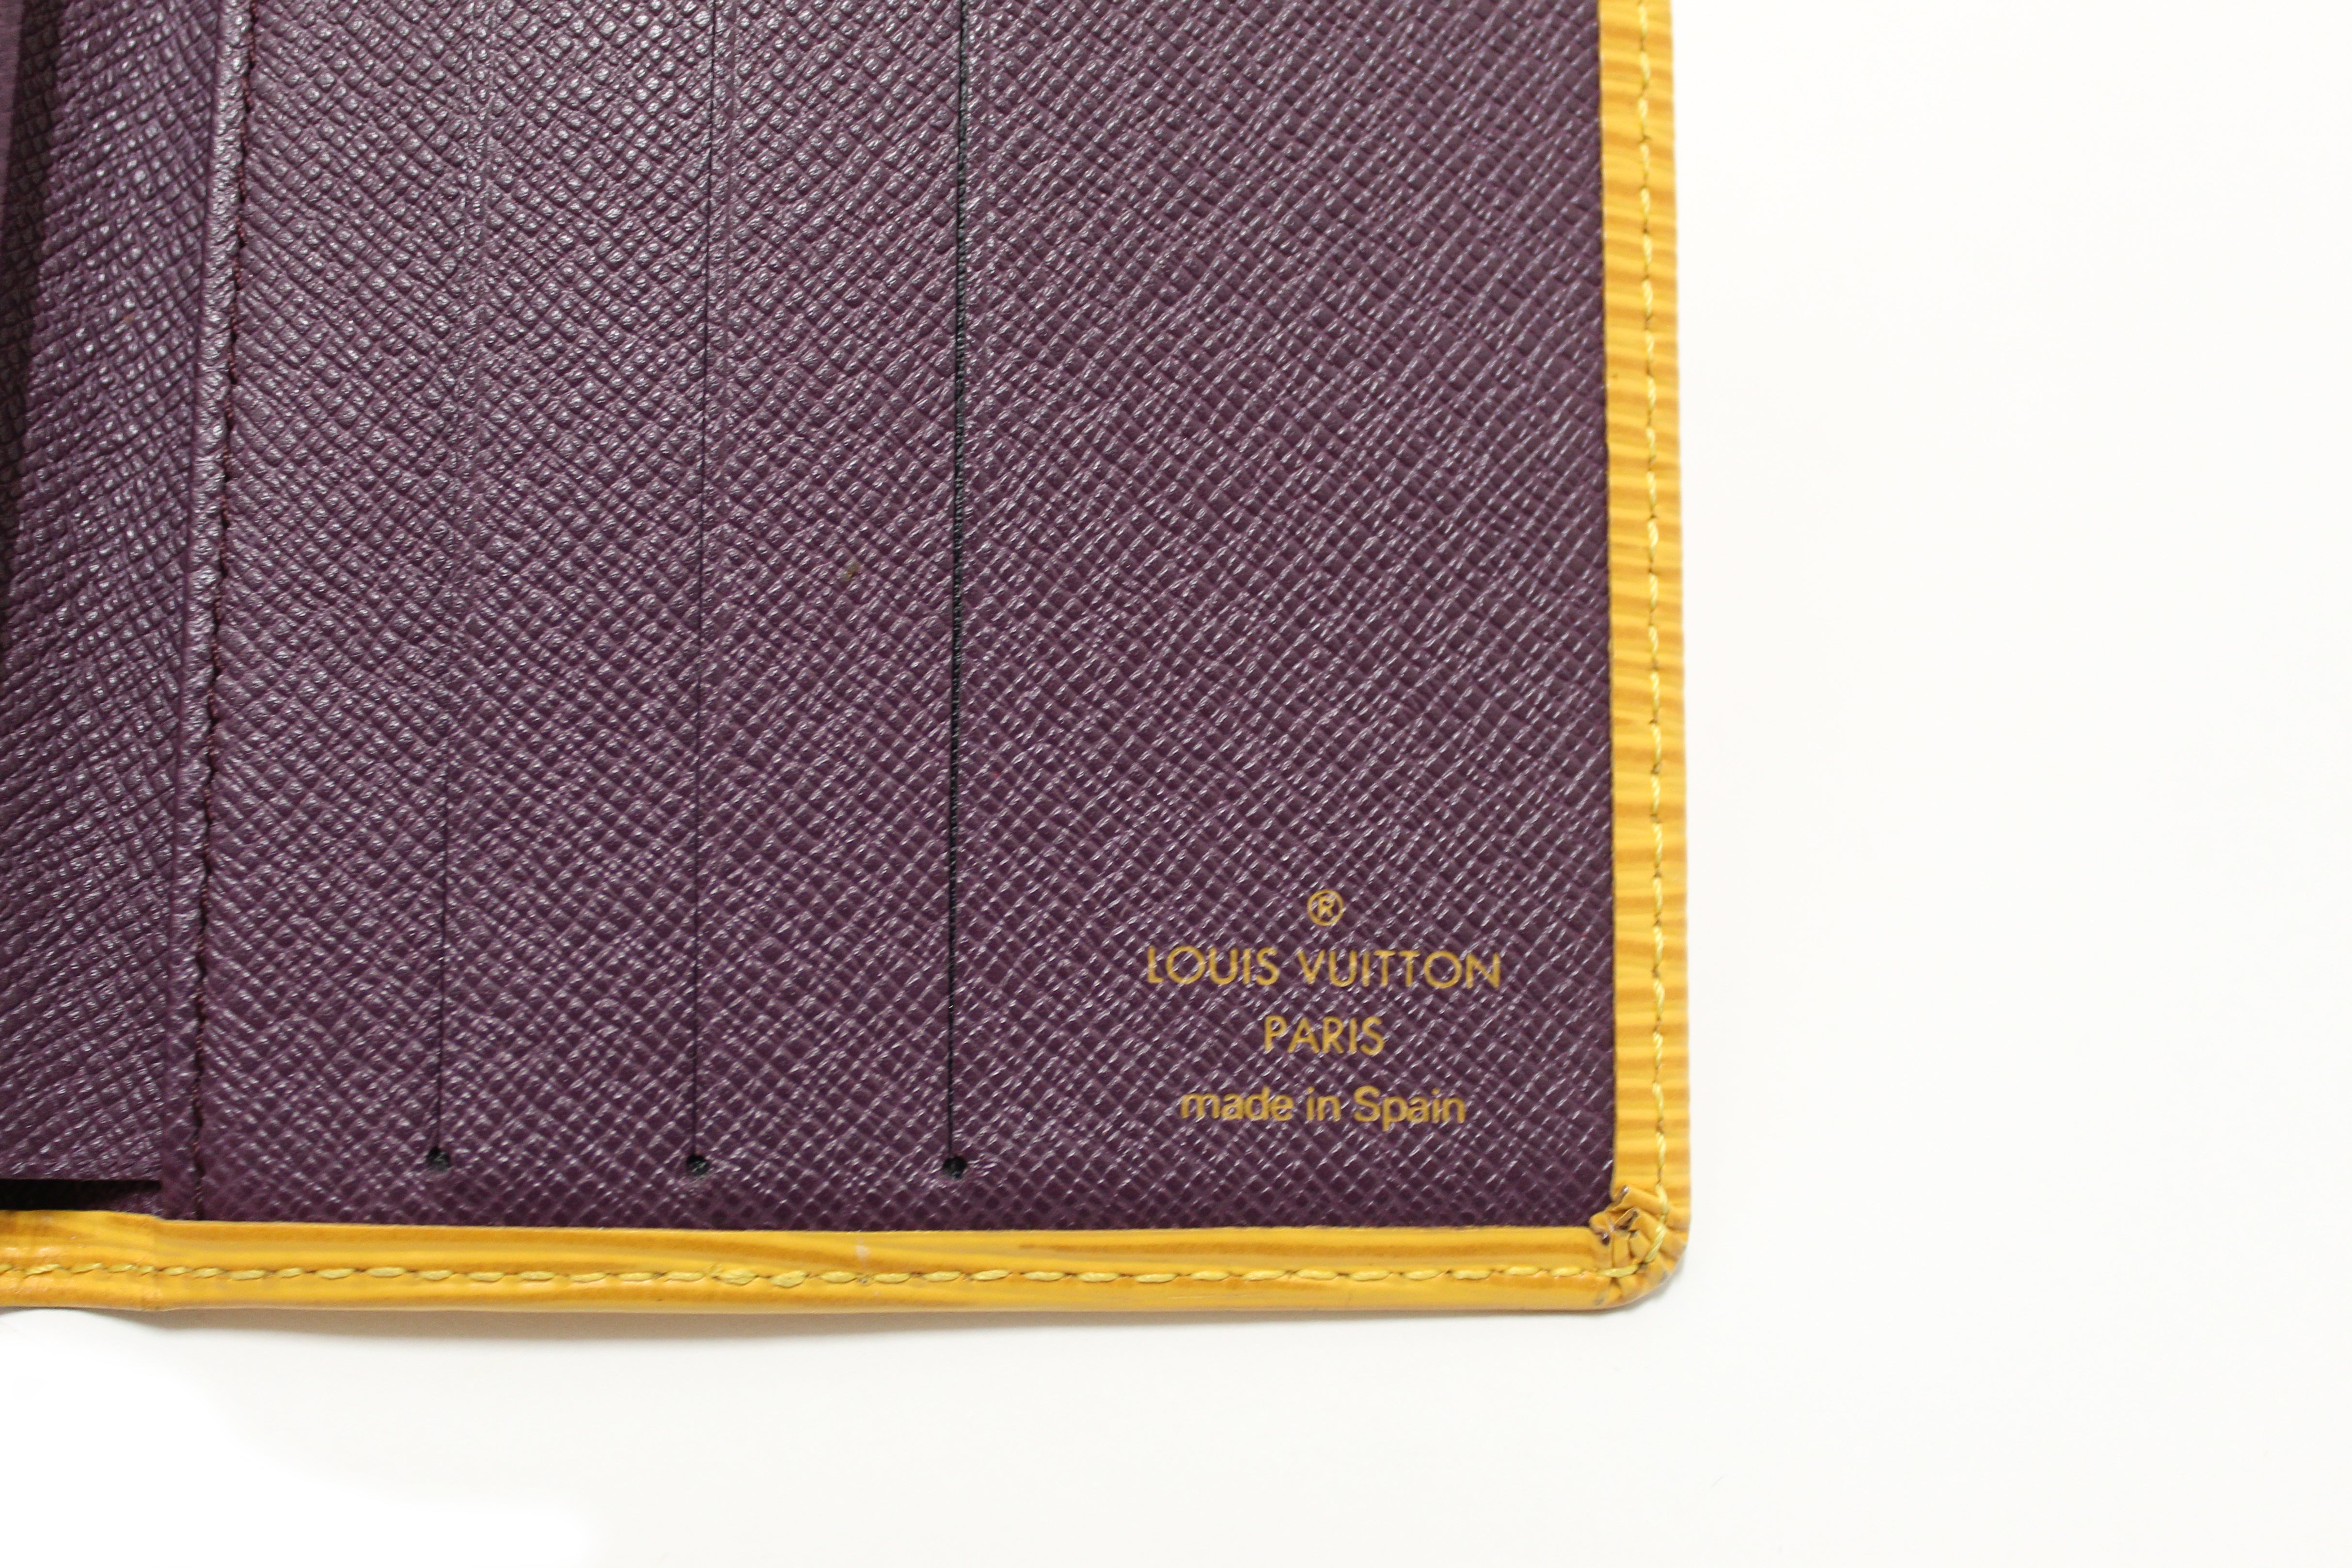 louis vuitton yellow authenticity card